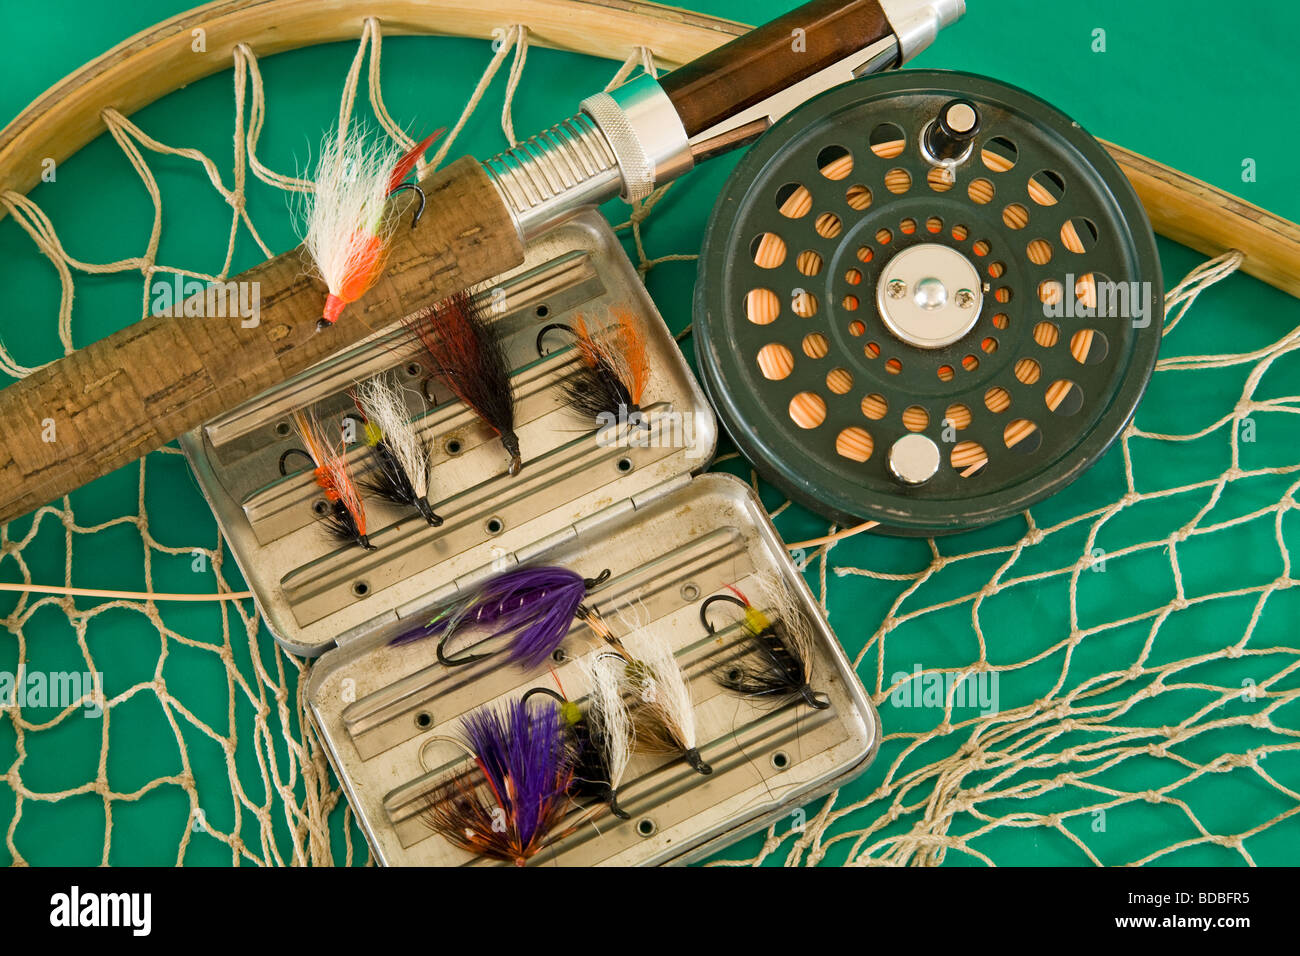 A fly rod, fly reel, trout fishing net, and box of artificial